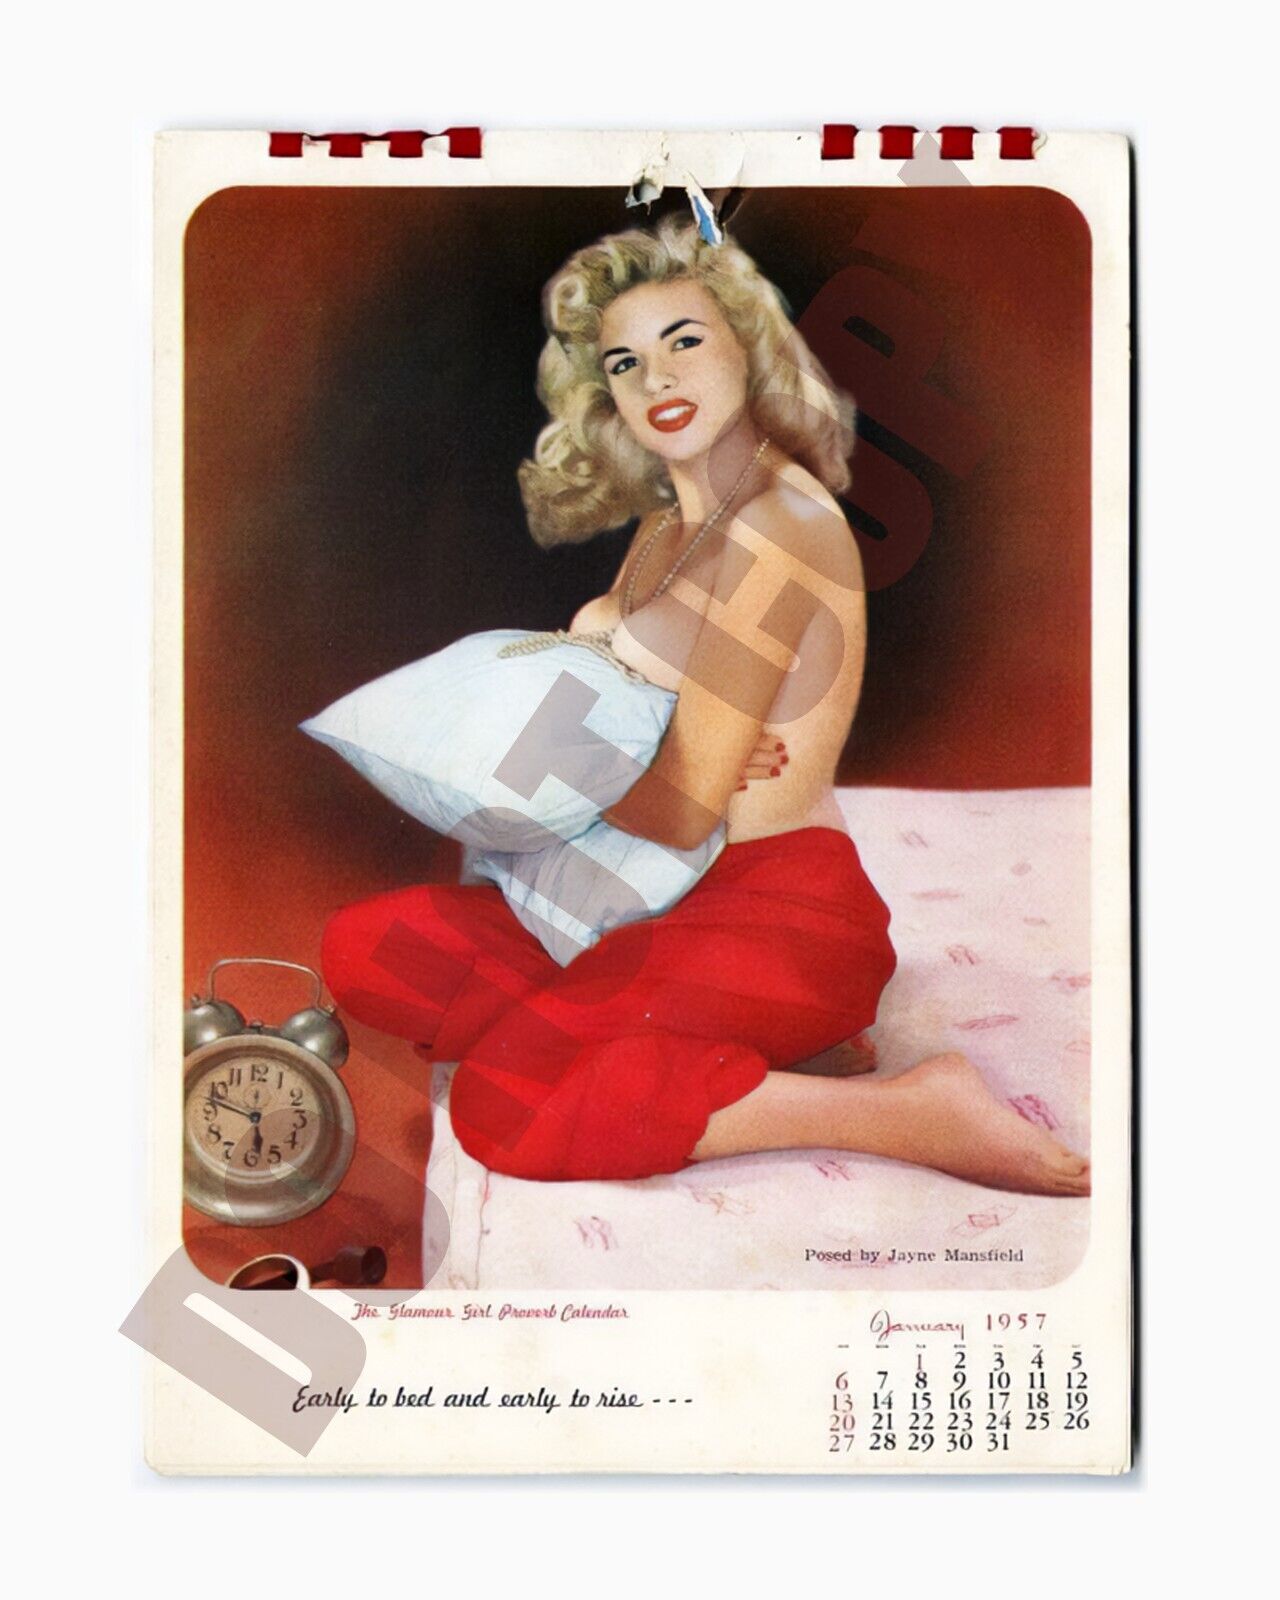 Januuary 1957 Glamour Girl Proverb Calender Jayne Mansfield 8x10 Photo